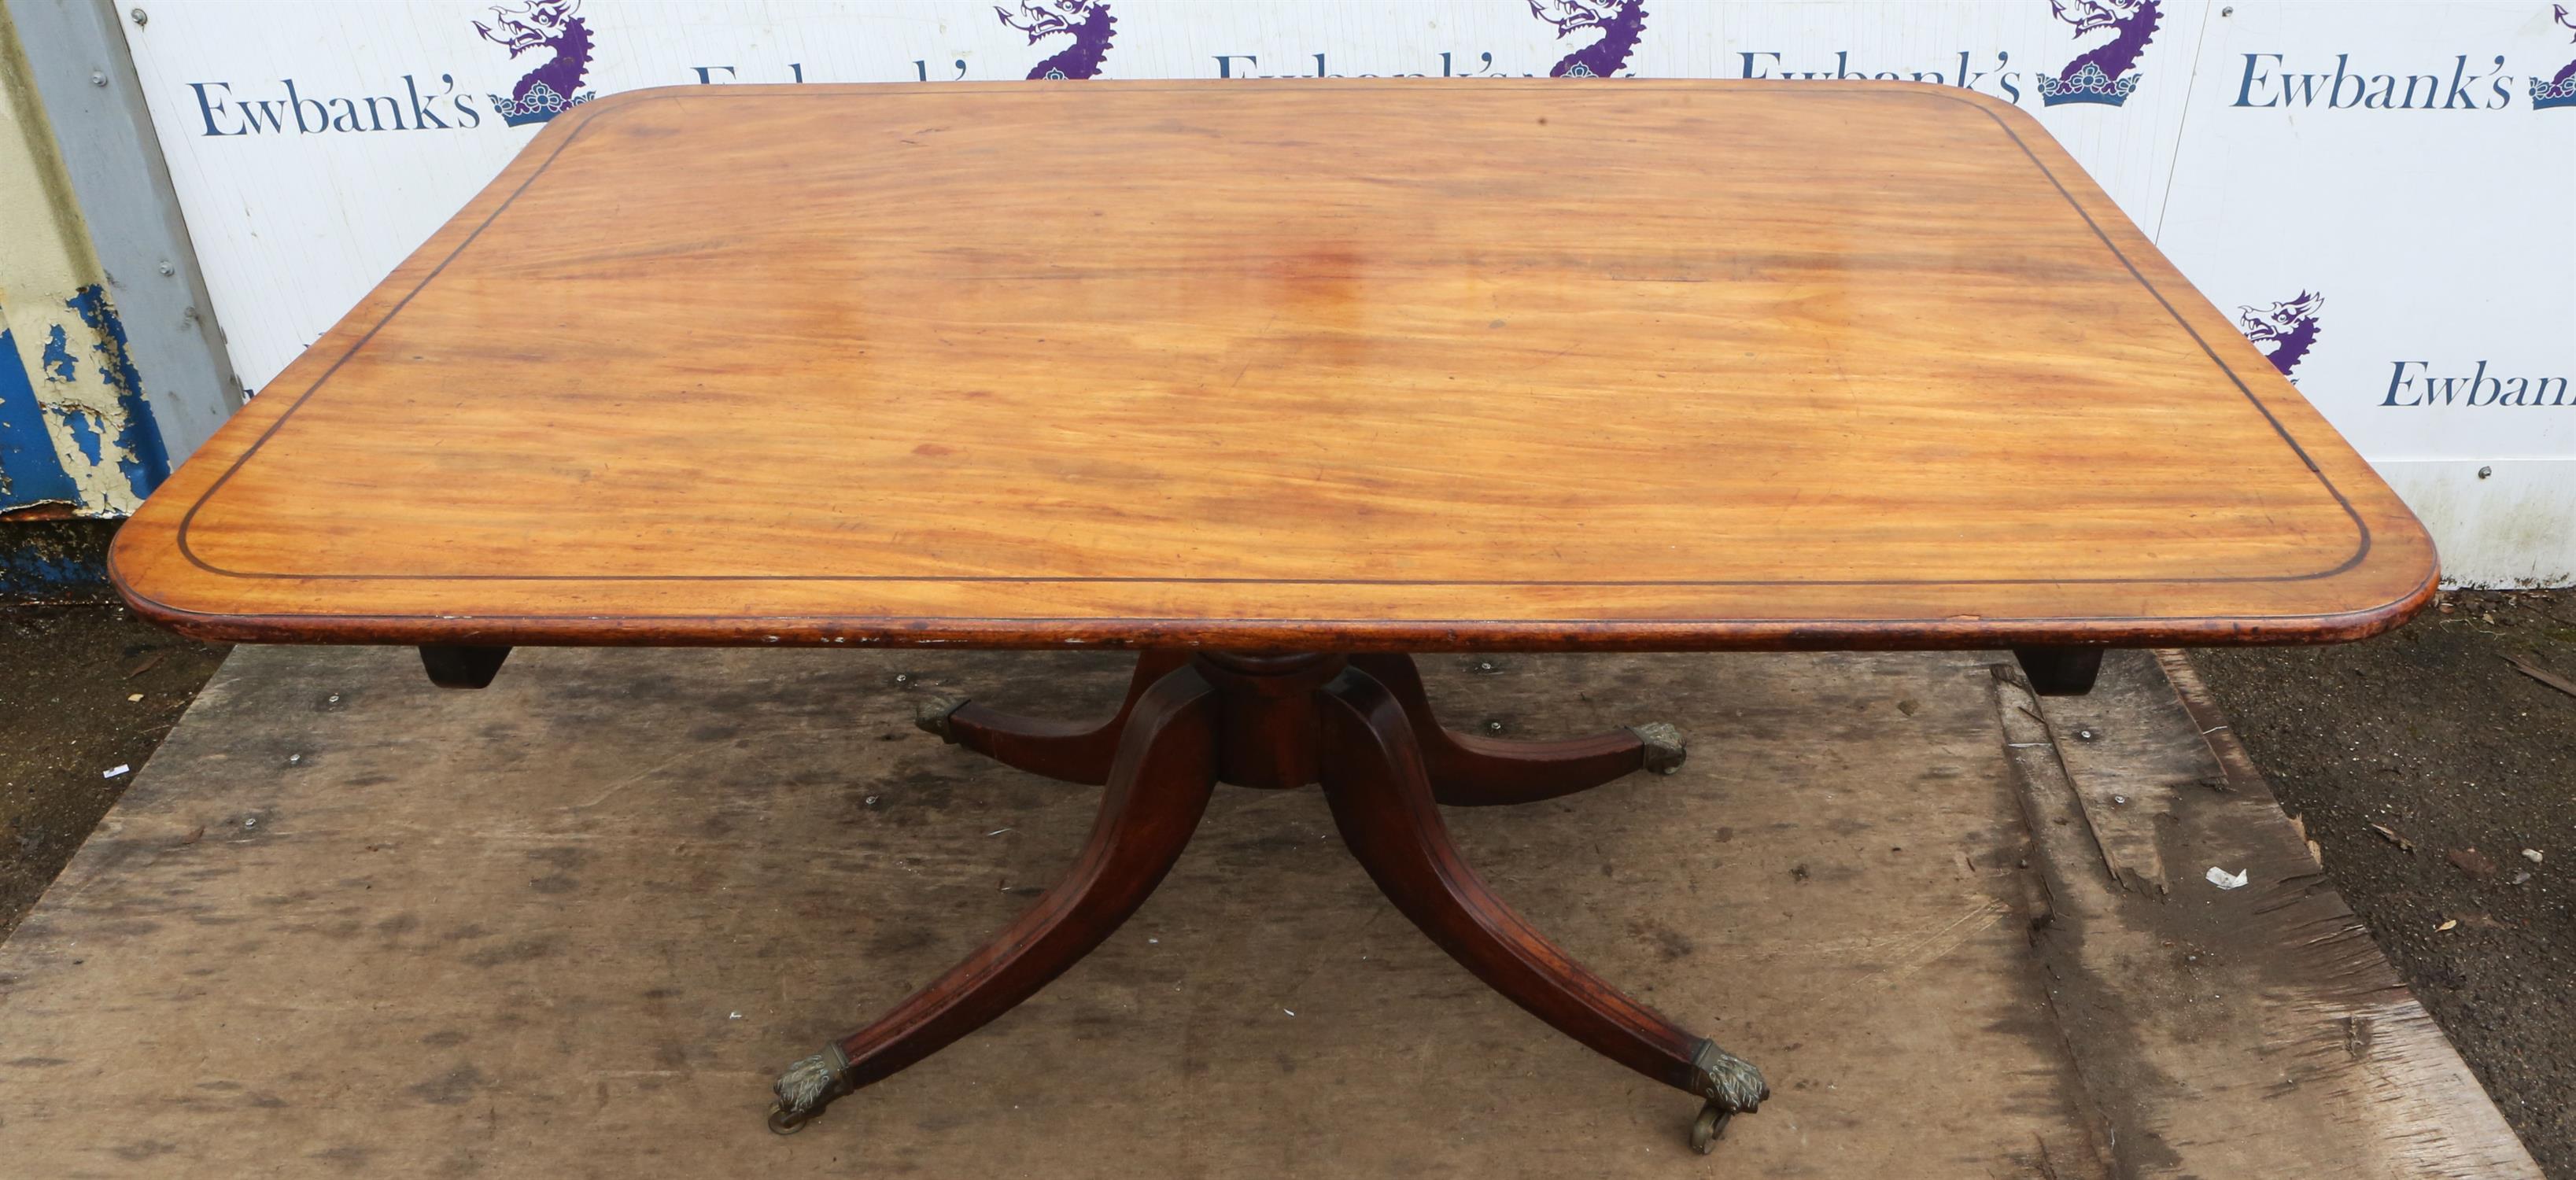 A Regency mahogany breakfast table, ebony banded, the tilt-top with rounded corners, - Image 2 of 3